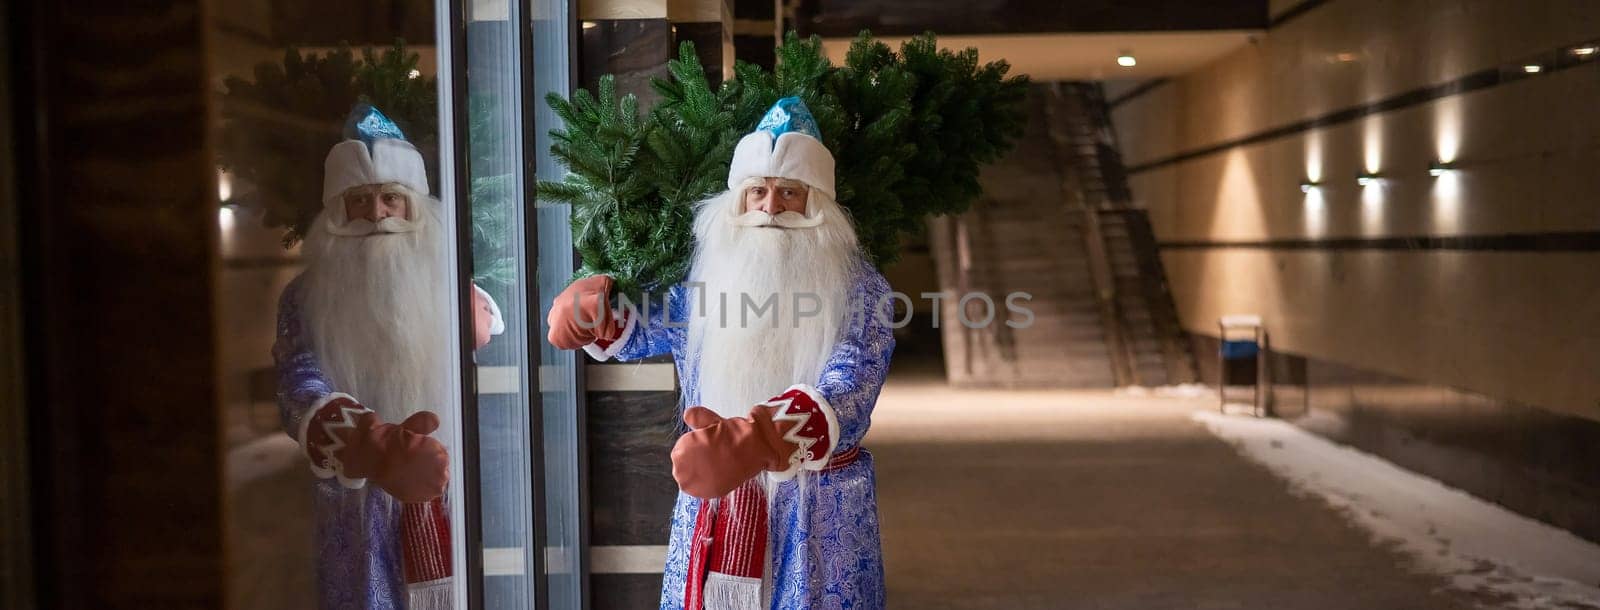 Russian Santa Claus carries a Christmas tree at night outdoors. by mrwed54